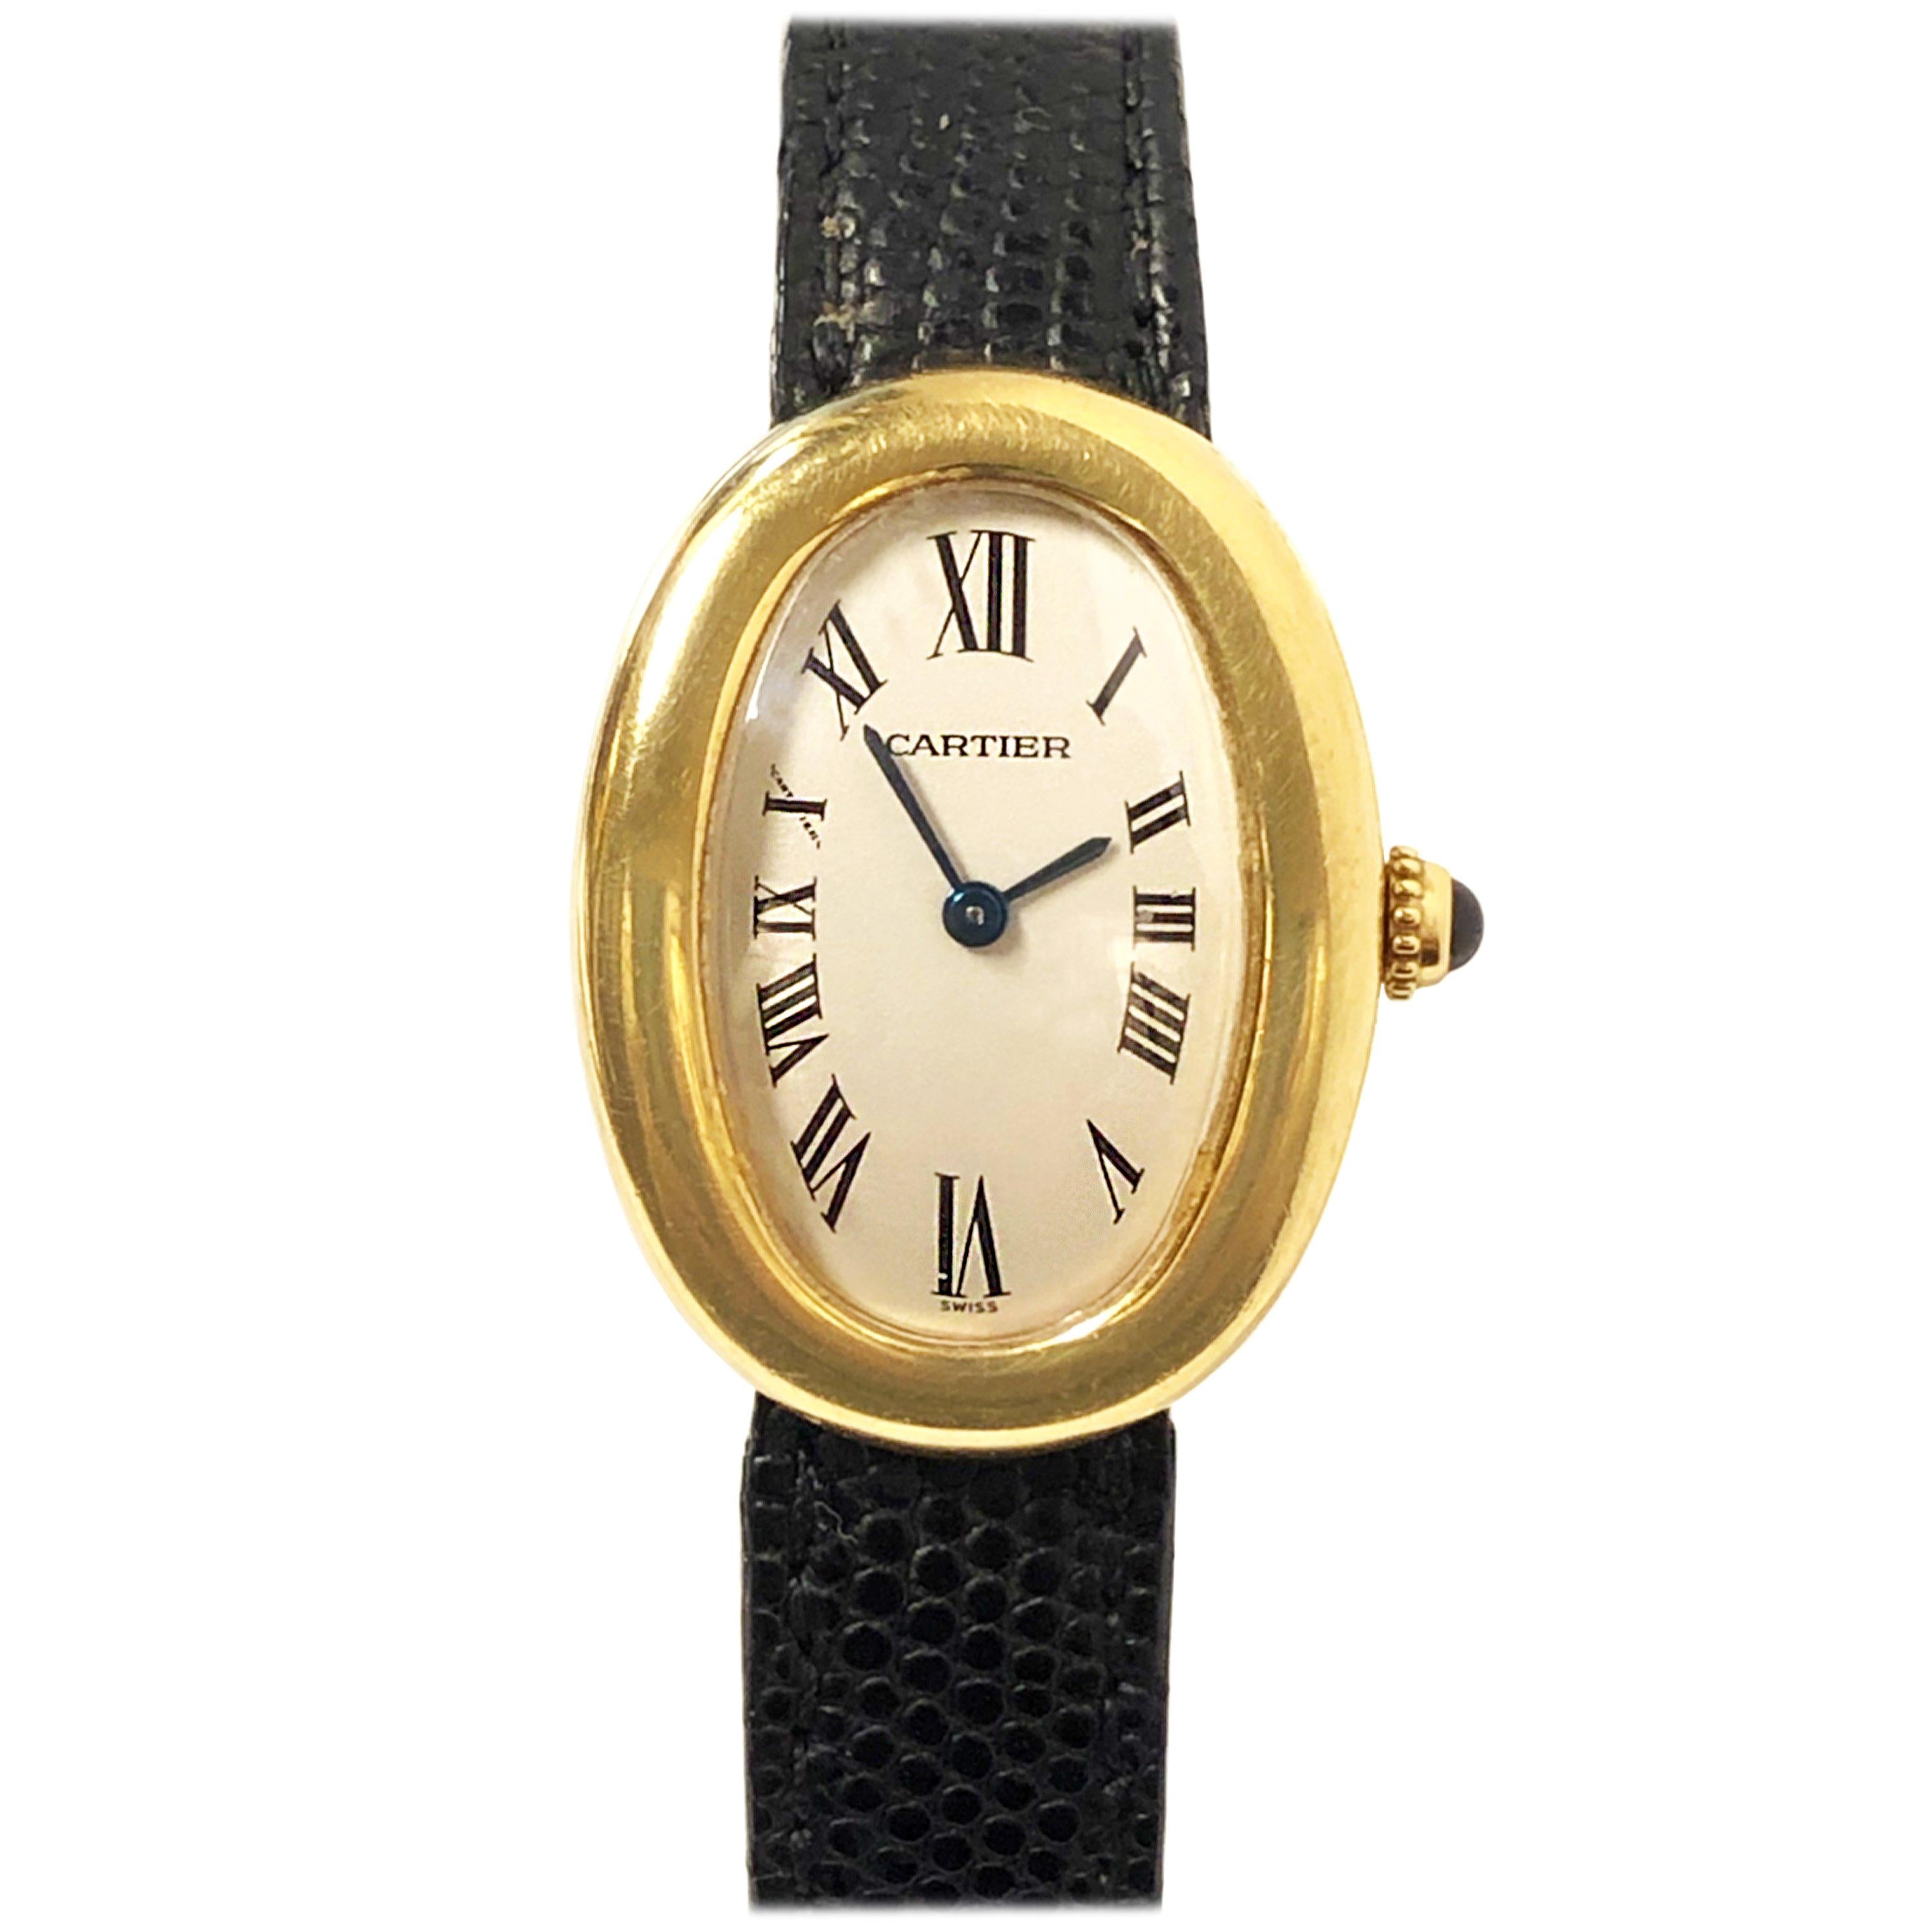 Cartier Baignoire Gold Wrist Watch Owned and Worn by Jerry Lewis